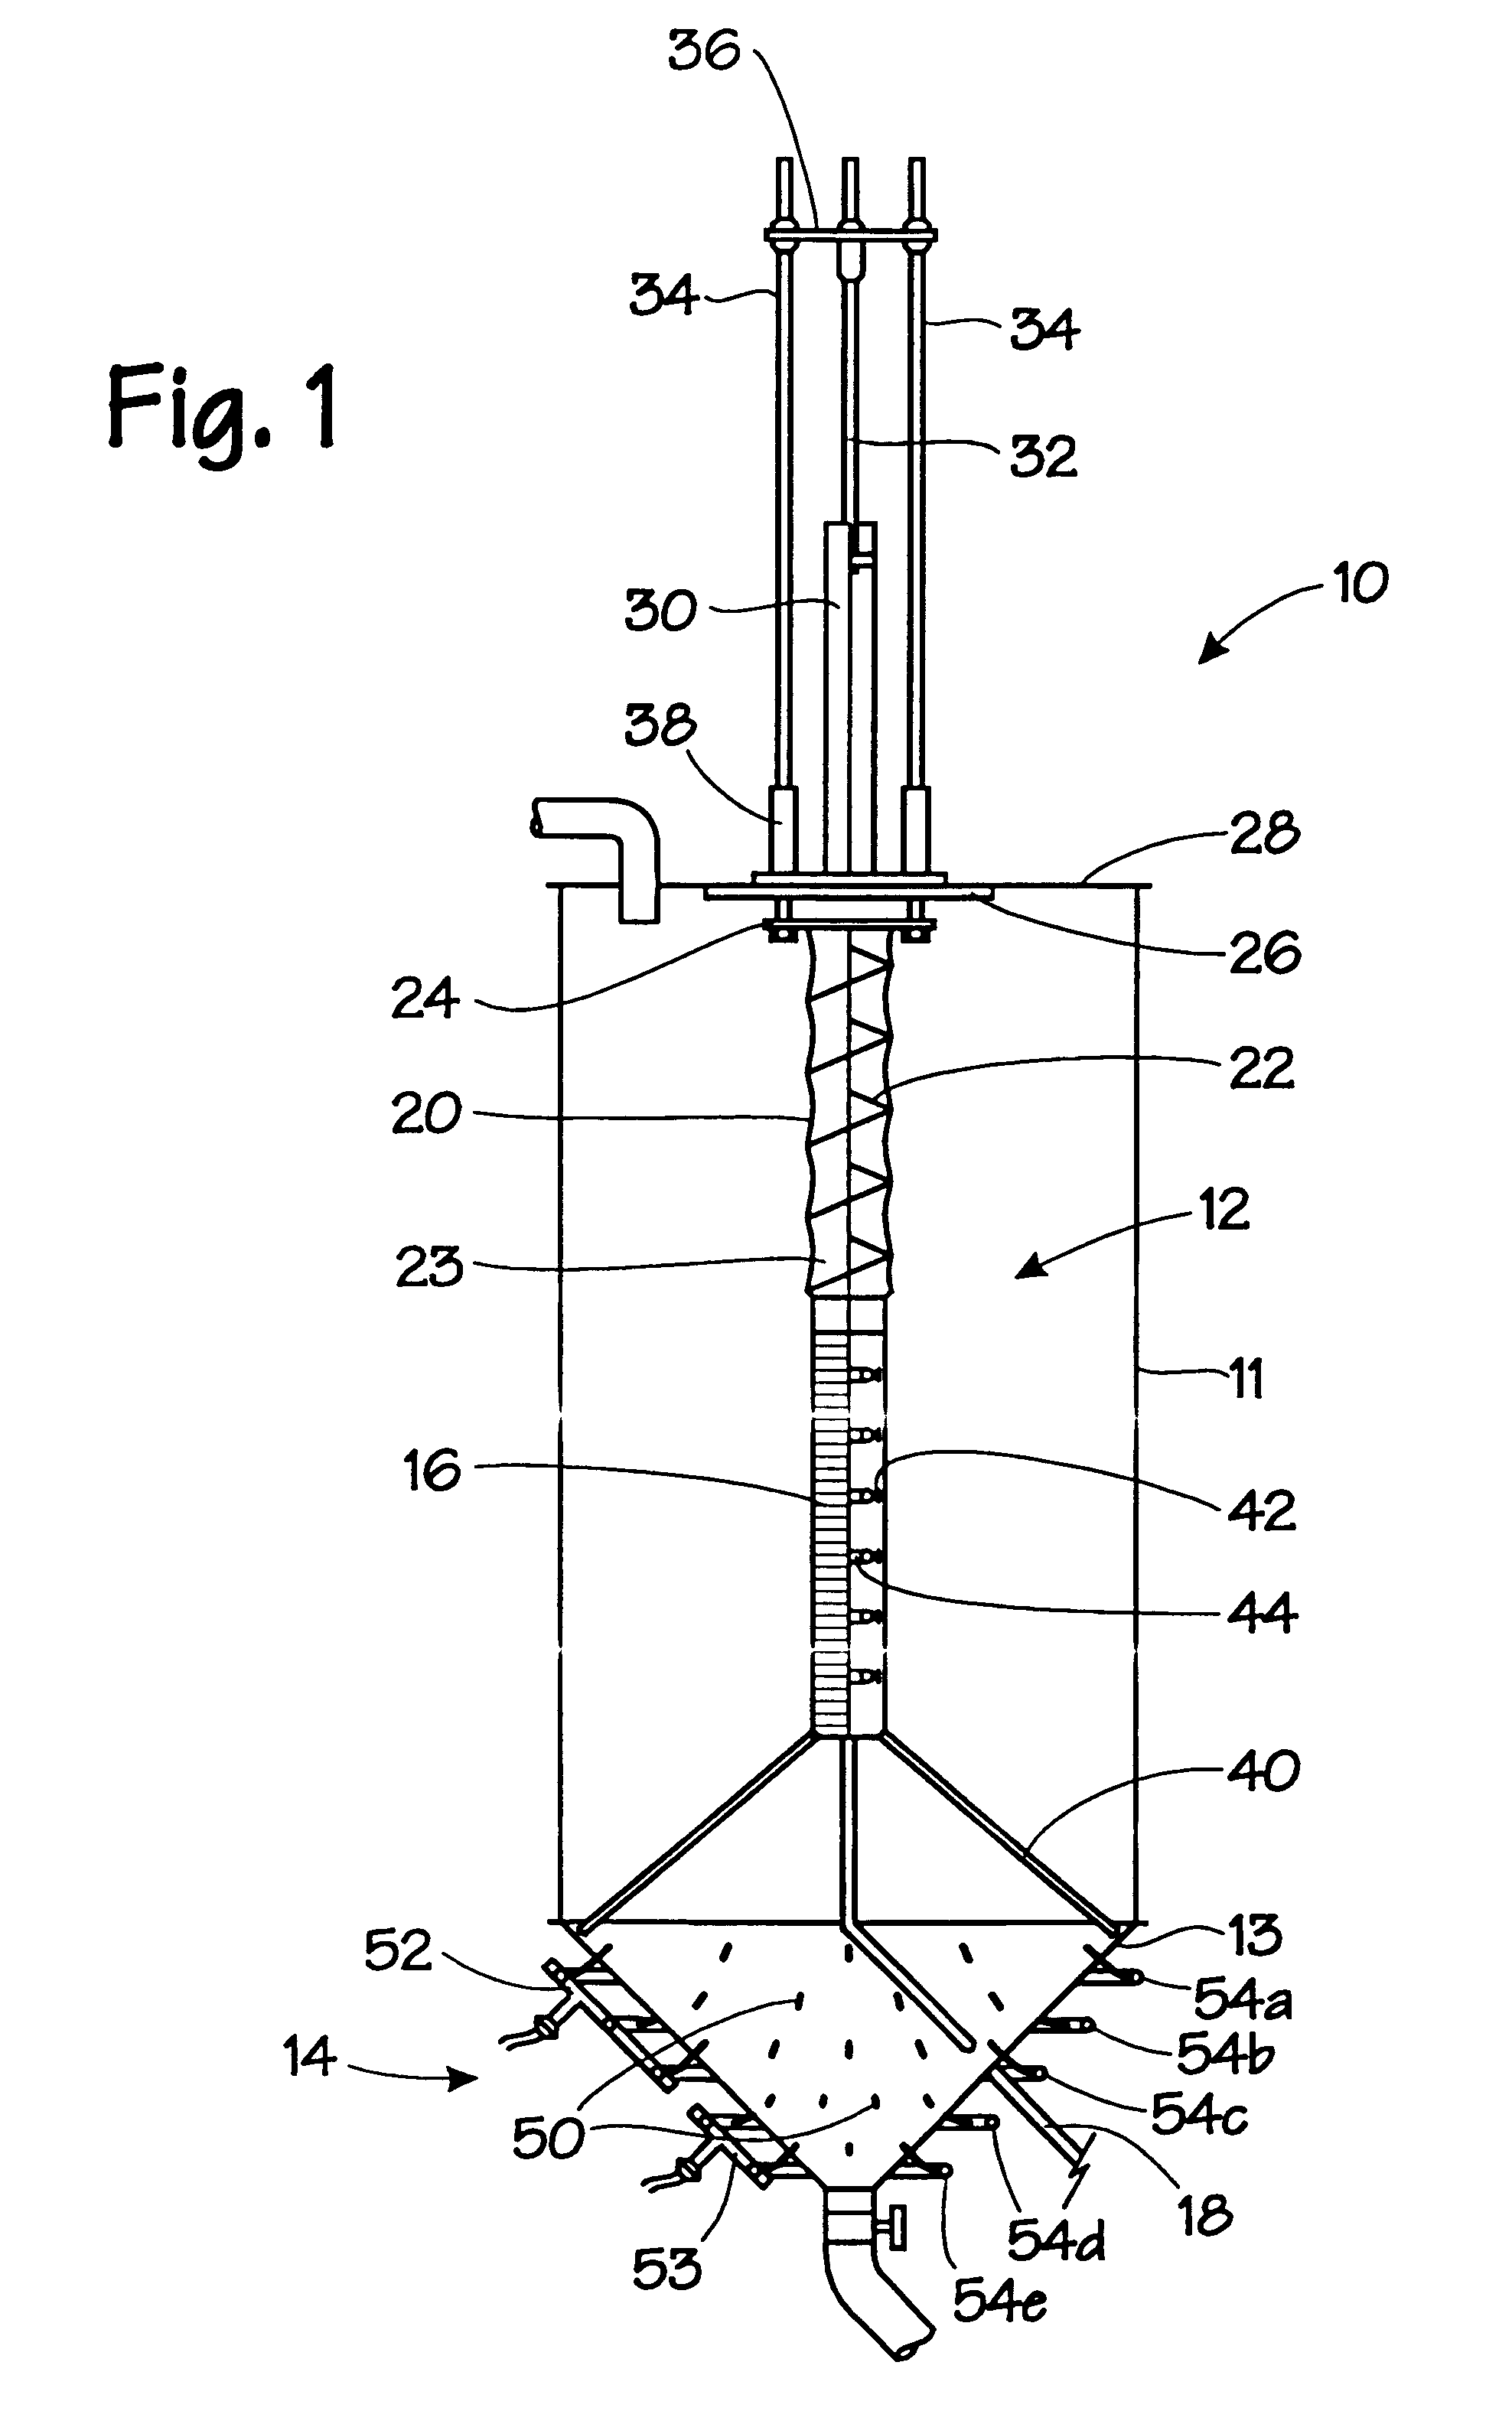 Apparatus for producing high density slurry and paste backfills